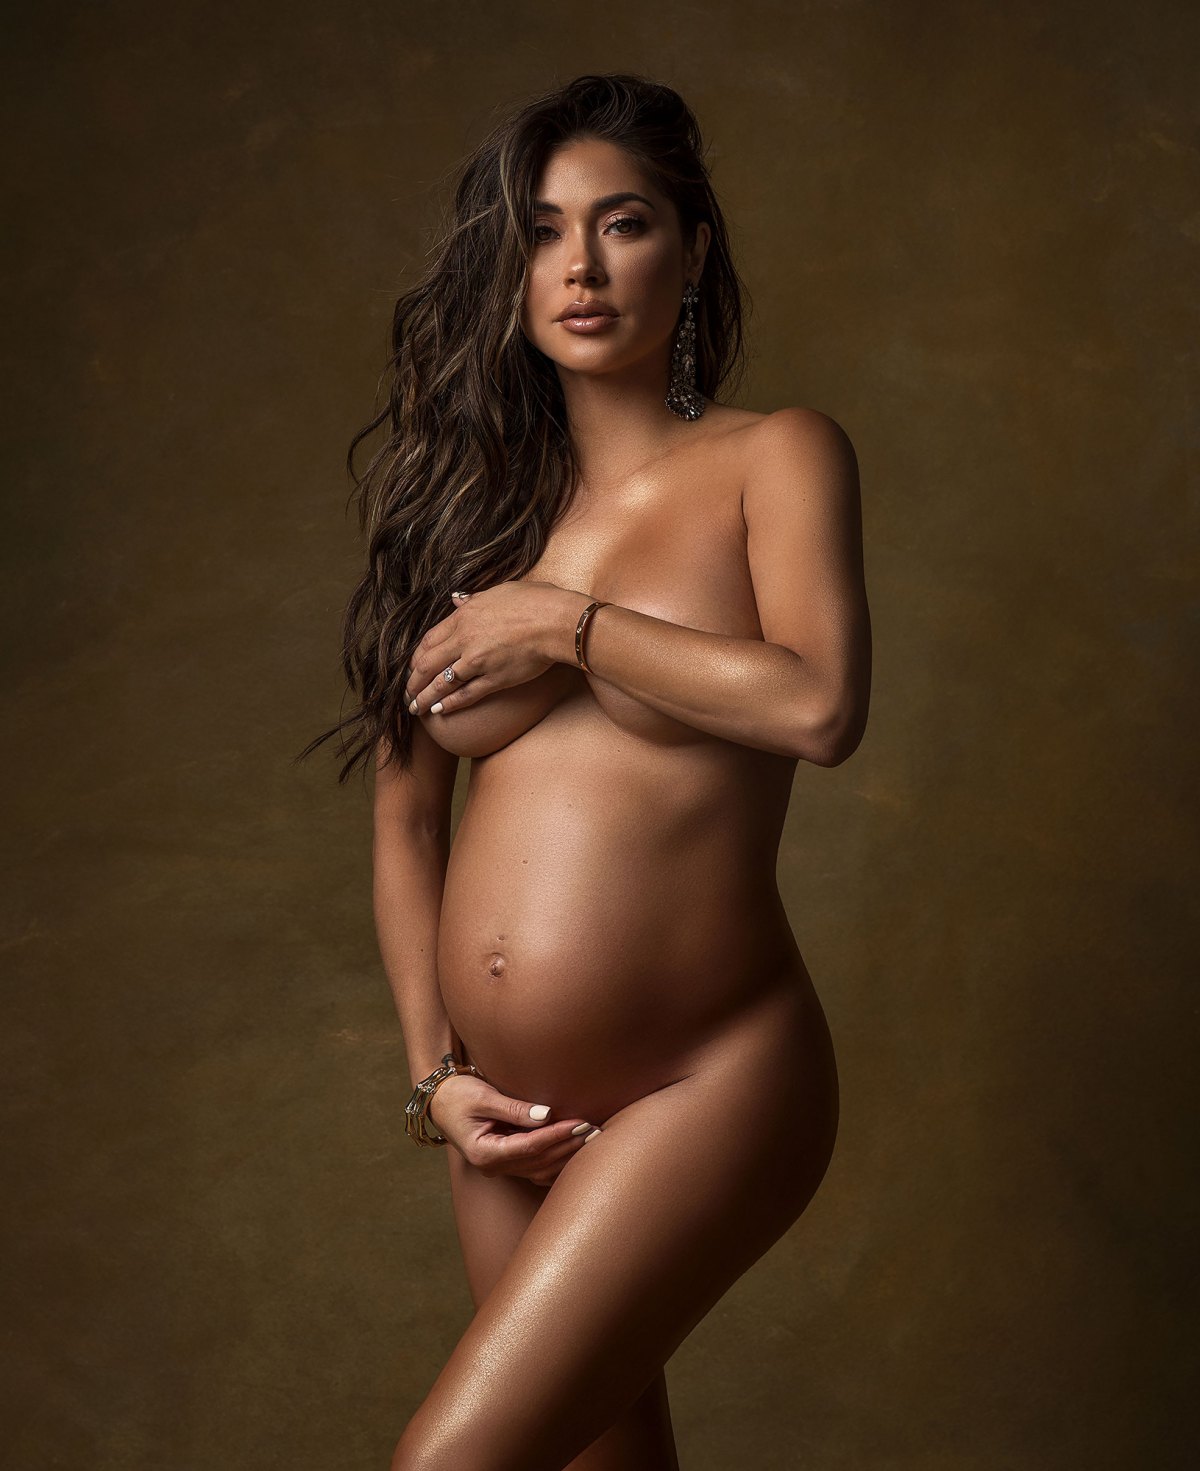 Scared Pregnant Nude - Celebrities Posing Nude While Pregnant: Maternity Pics